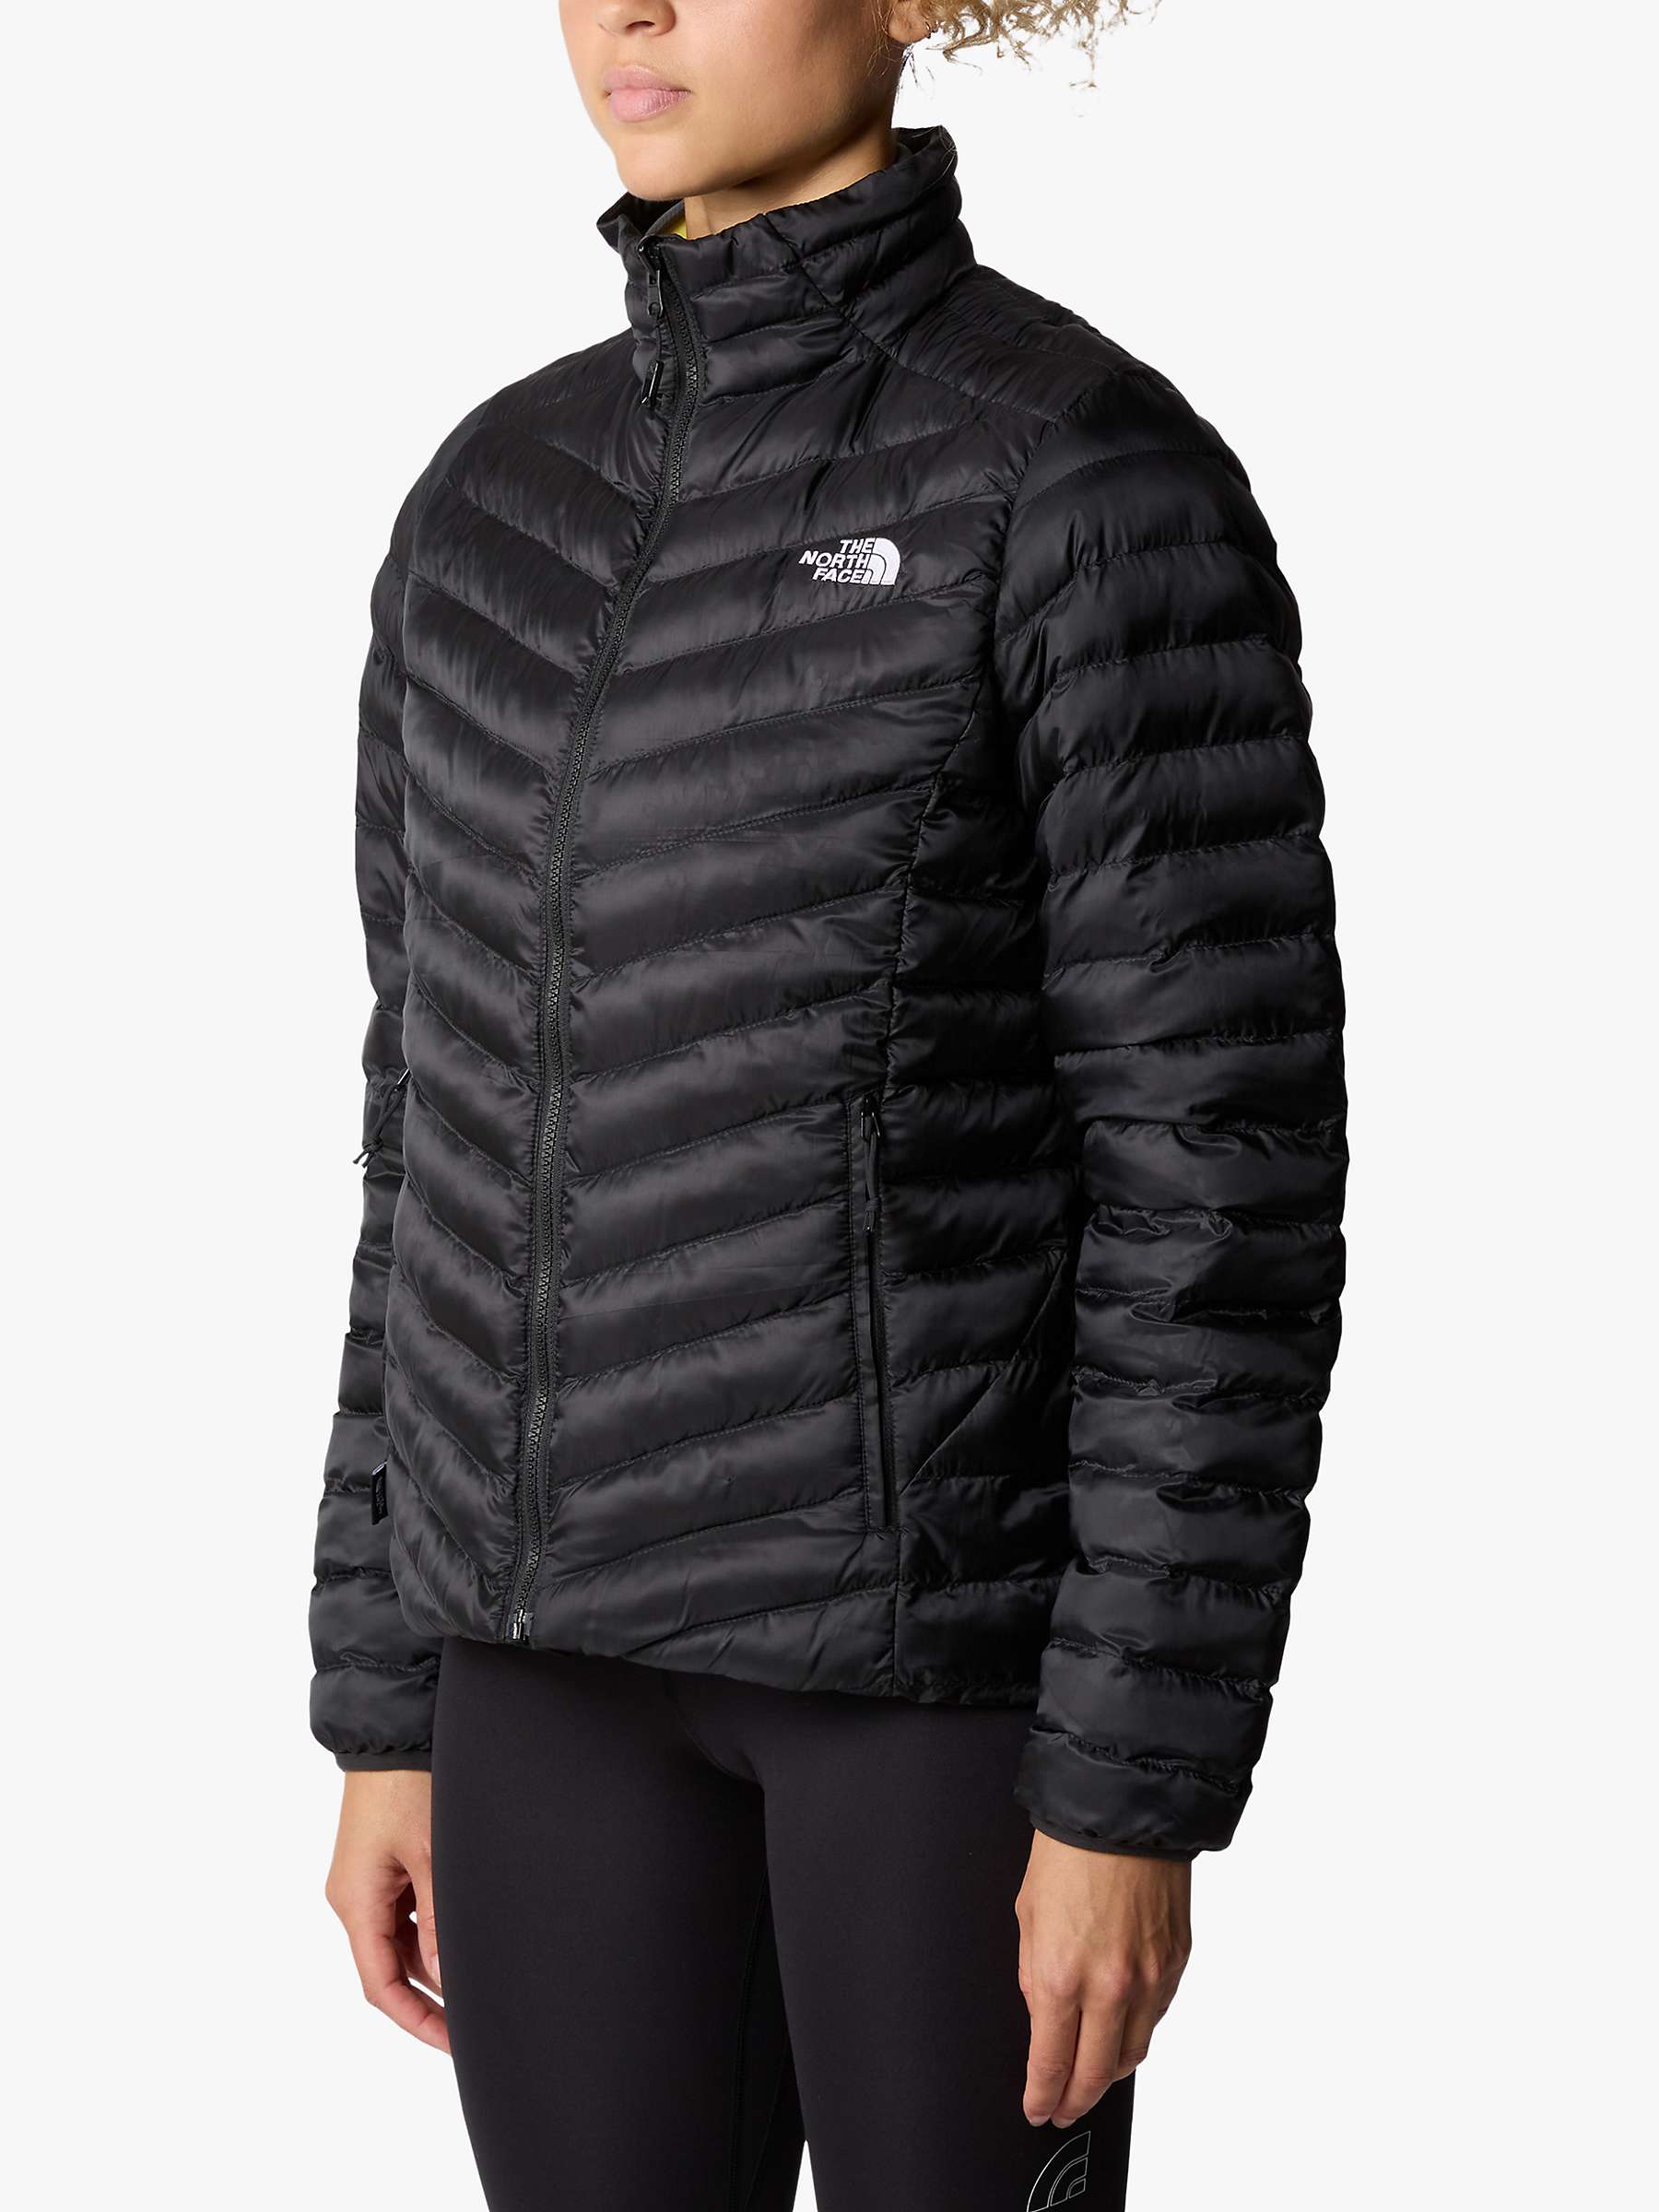 Buy The North Face Women's Huila Jacket, Tnf Black Online at johnlewis.com